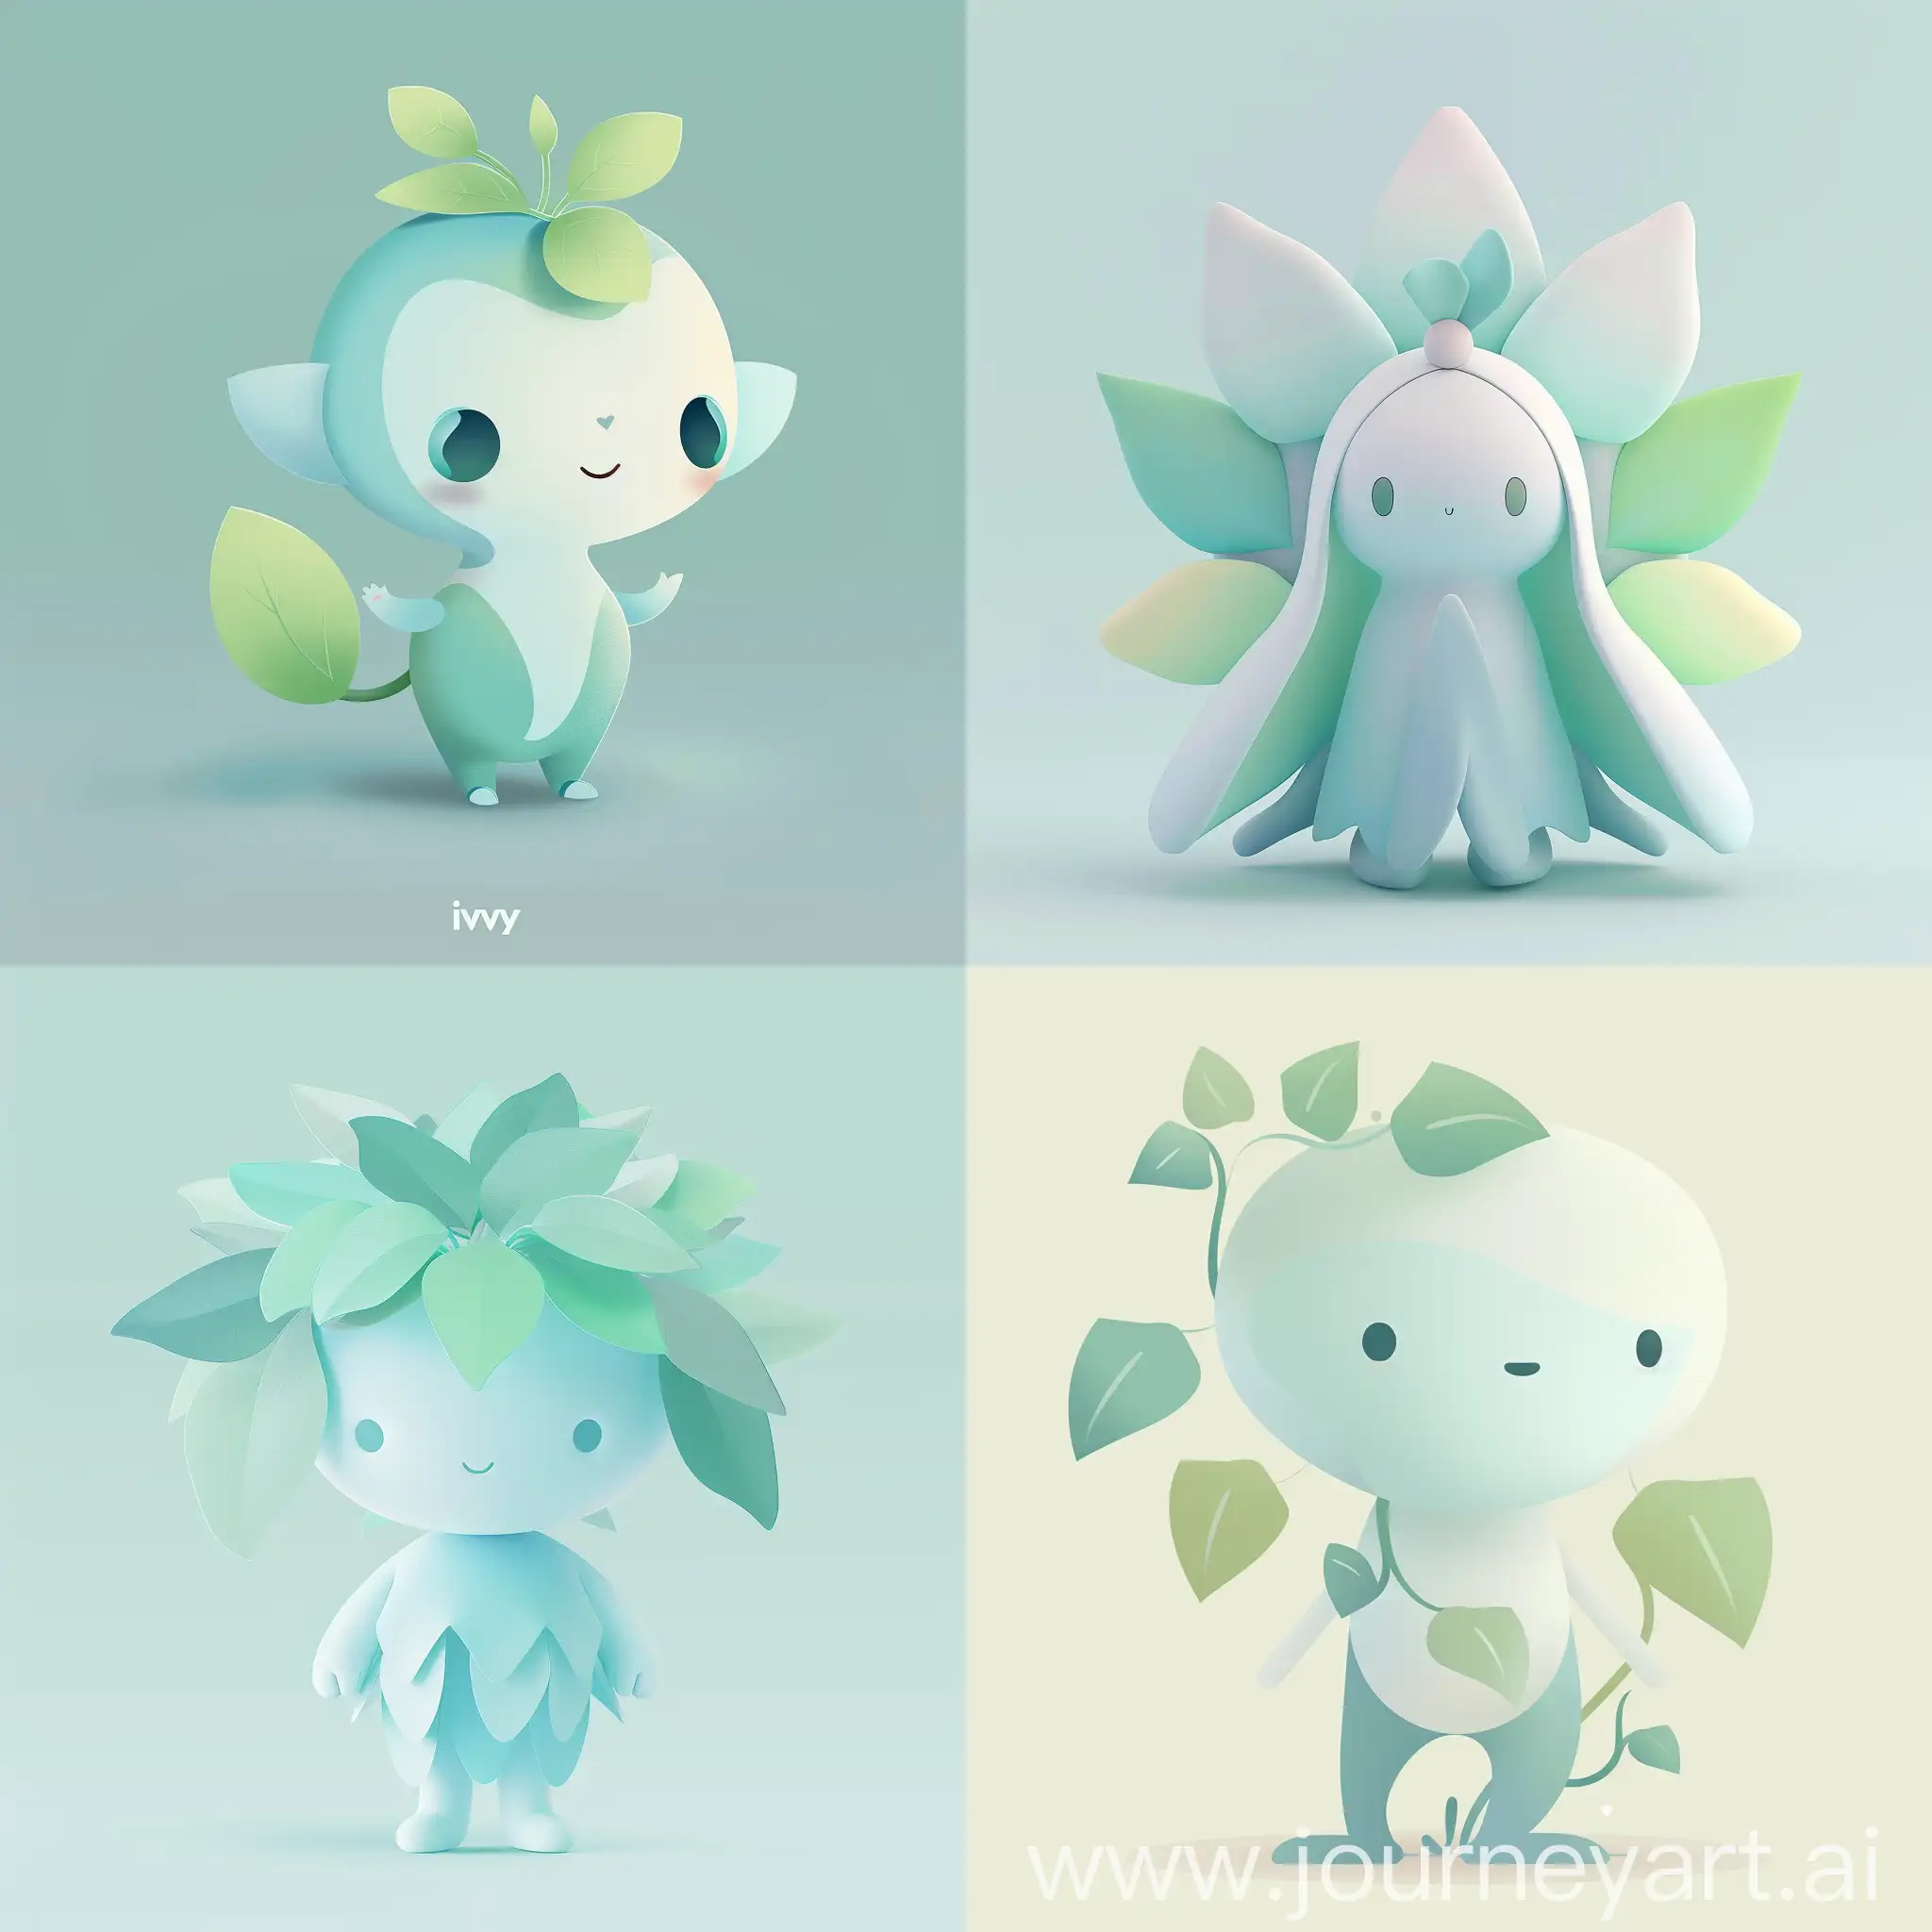 "Design a minimalist and friendly character named 'Ivy' for the Nexus platform. Ivy should be inspired by the playful essence of characters in 'Soul,' with a modern, streamlined design. The character should be gender-neutral and ageless, using a color scheme of pastel blue (#AEC6CF), pastel green (#77DD77), and neutral white (#F5F5F5). Ivy should embody the values of innovation, collaboration, and learning, serving as a virtual guide and mascot for the platform."
Appearance: Minimalist and friendly with a modern design, inspired by the playful essence of characters in "Soul."
Age and Gender: Gender-neutral and ageless to appeal to a broad audience.
Color Scheme: Soft, calming pastel colors such as pastel blue (#AEC6CF), pastel green (#77DD77), and neutral white (#F5F5F5).